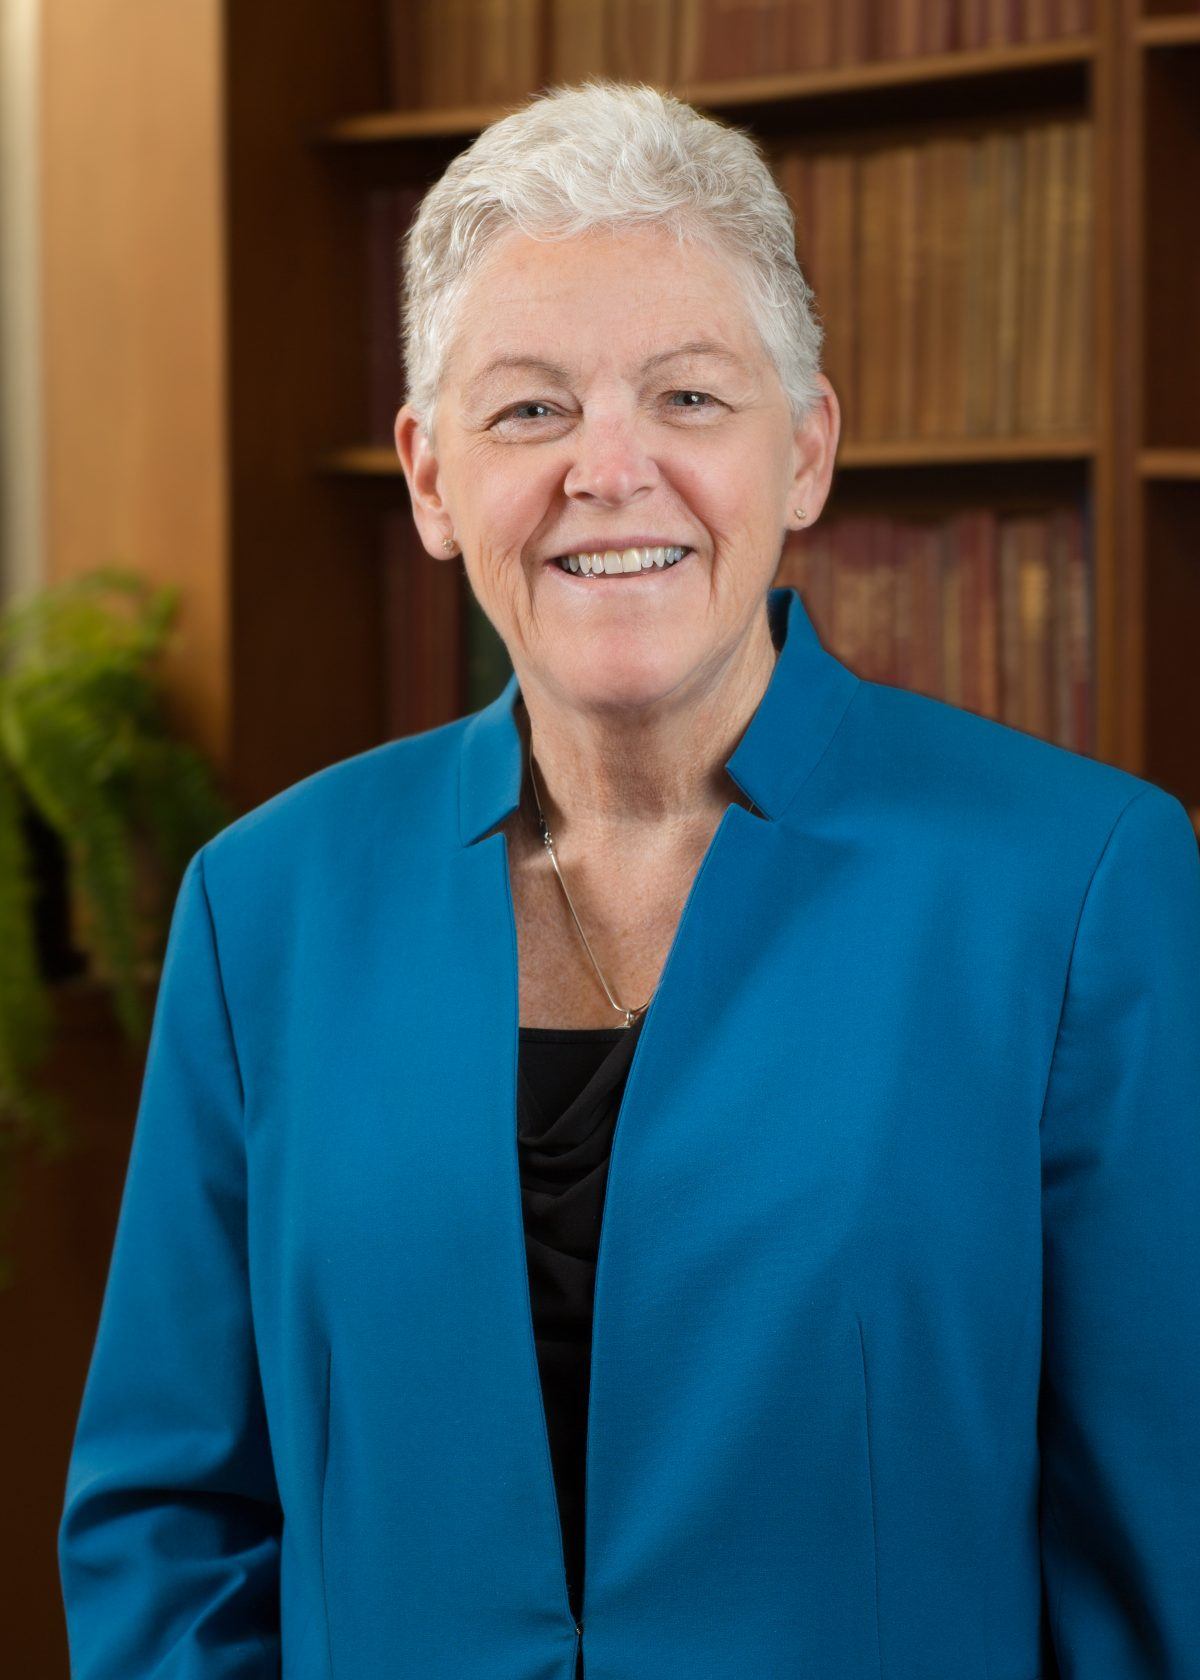 Gina McCarthy, former administrator of the Environmental Protection Agency, Menschel Senior Fellow at Harvard T.H. Chan School of Public Health